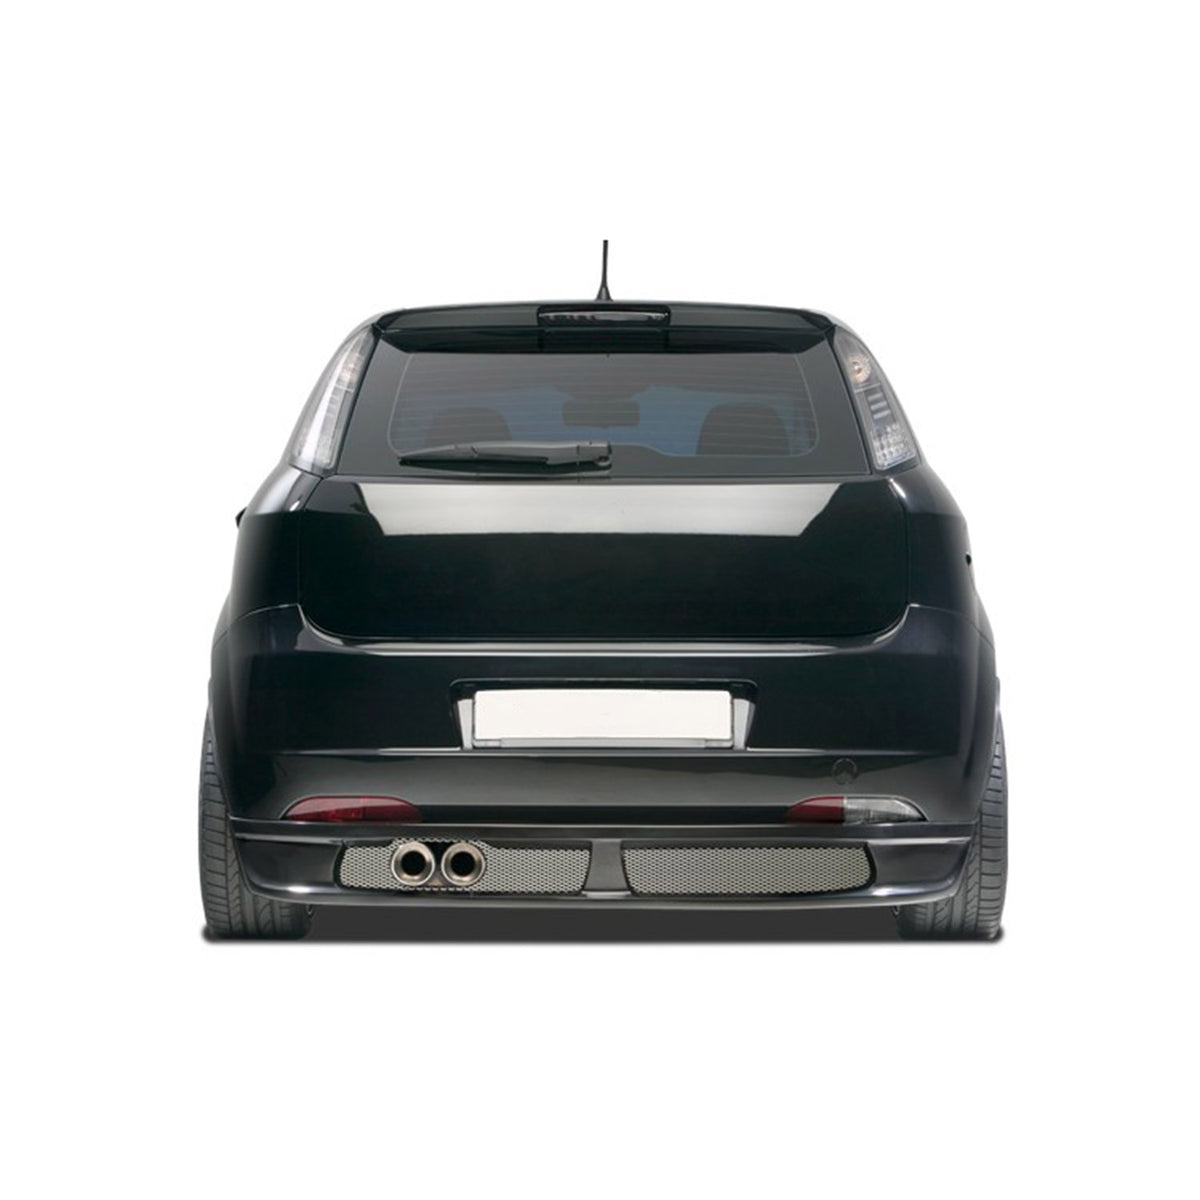 RDX rear apron extension for Fiat Grande Punto 2005-2023 with TÜV